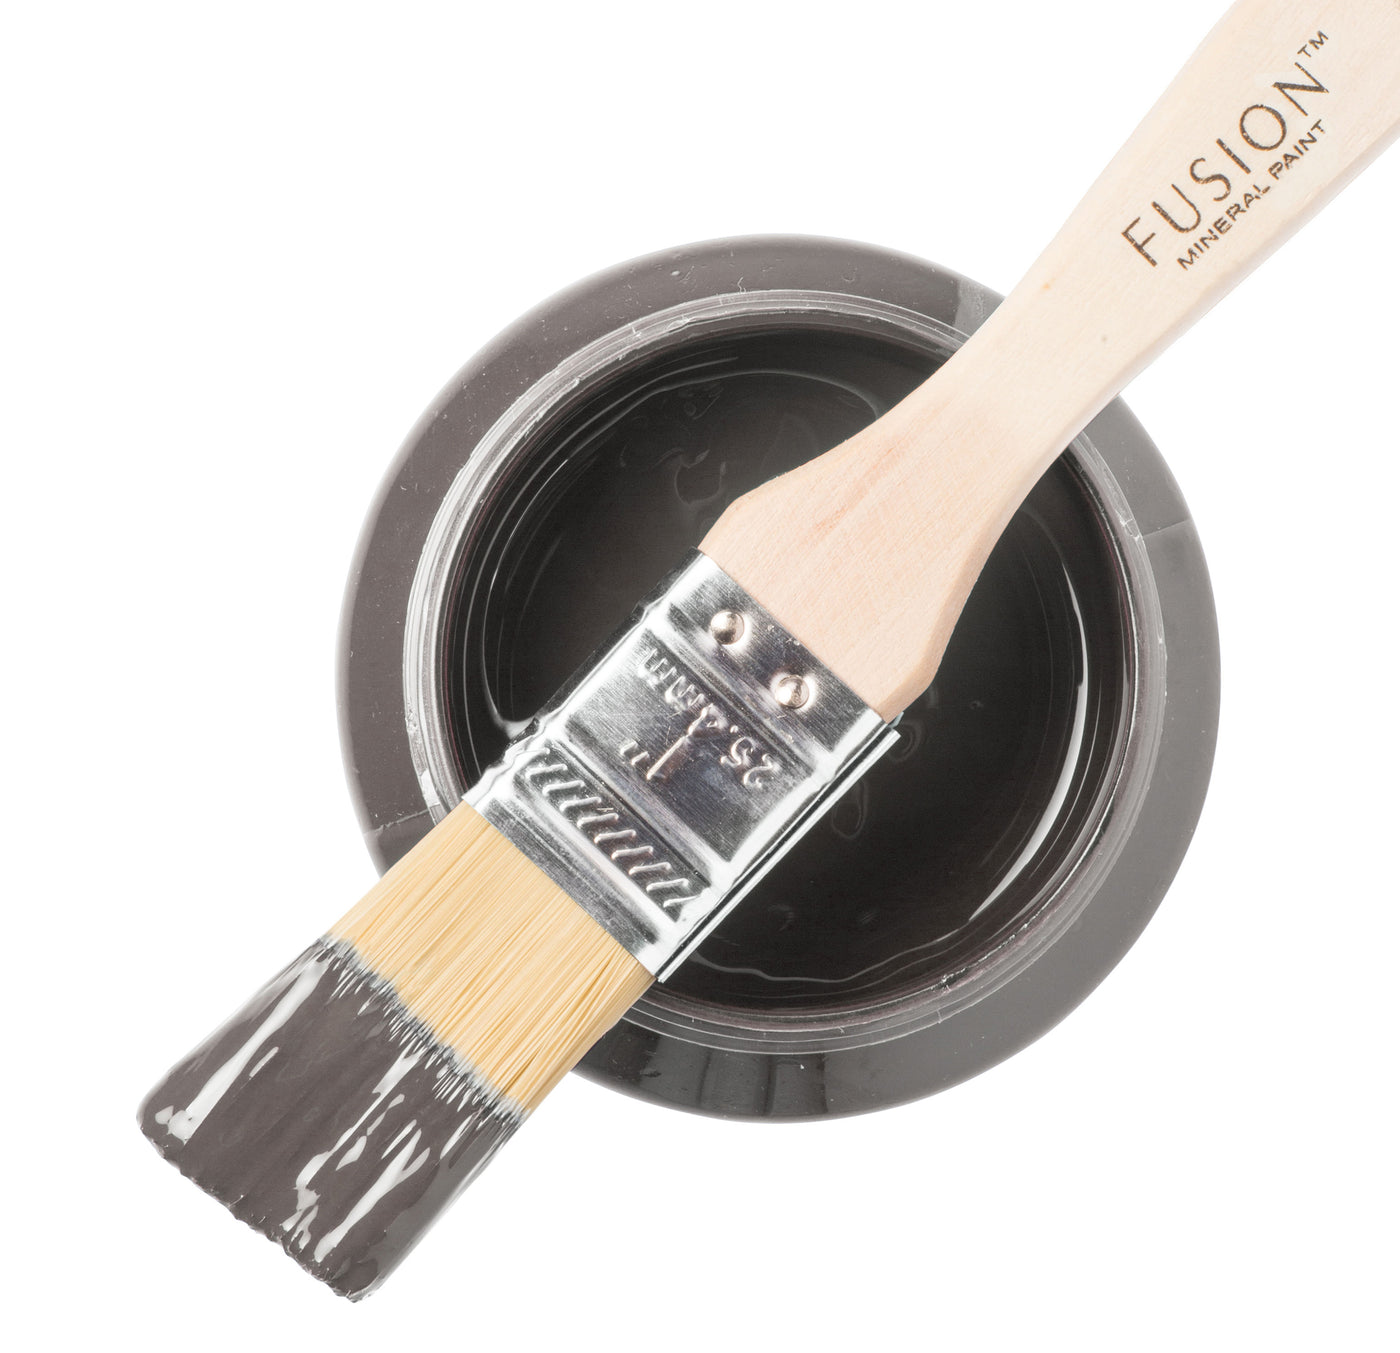 Deep grey paint can and brush from Fusion Mineral Paint